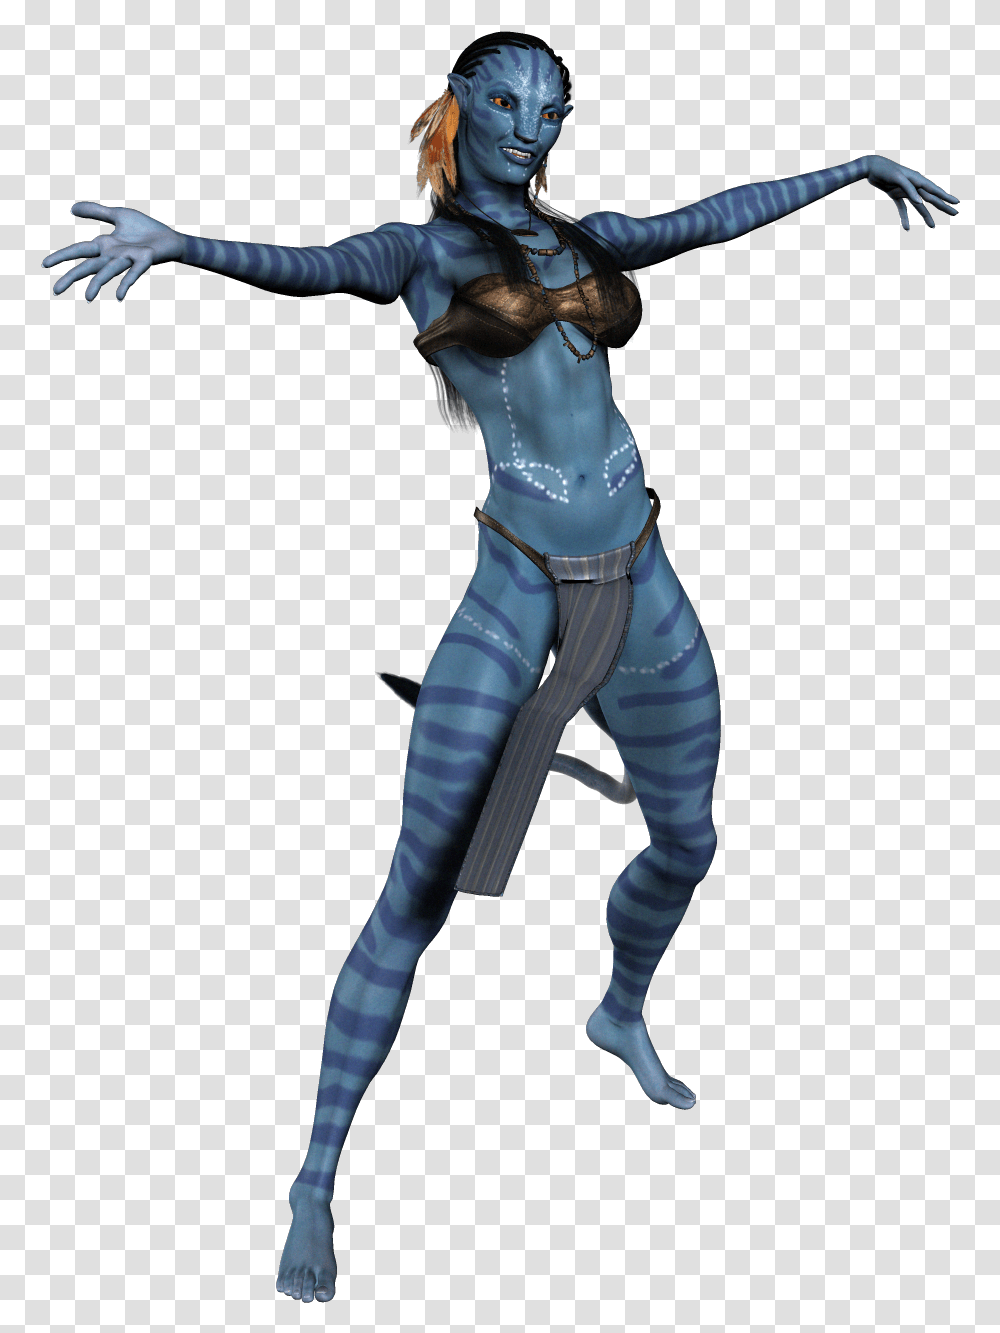 Download Avatar Neytiri Image For Free Avatar Background, Person, Leisure Activities, Dance Pose, Acrobatic Transparent Png